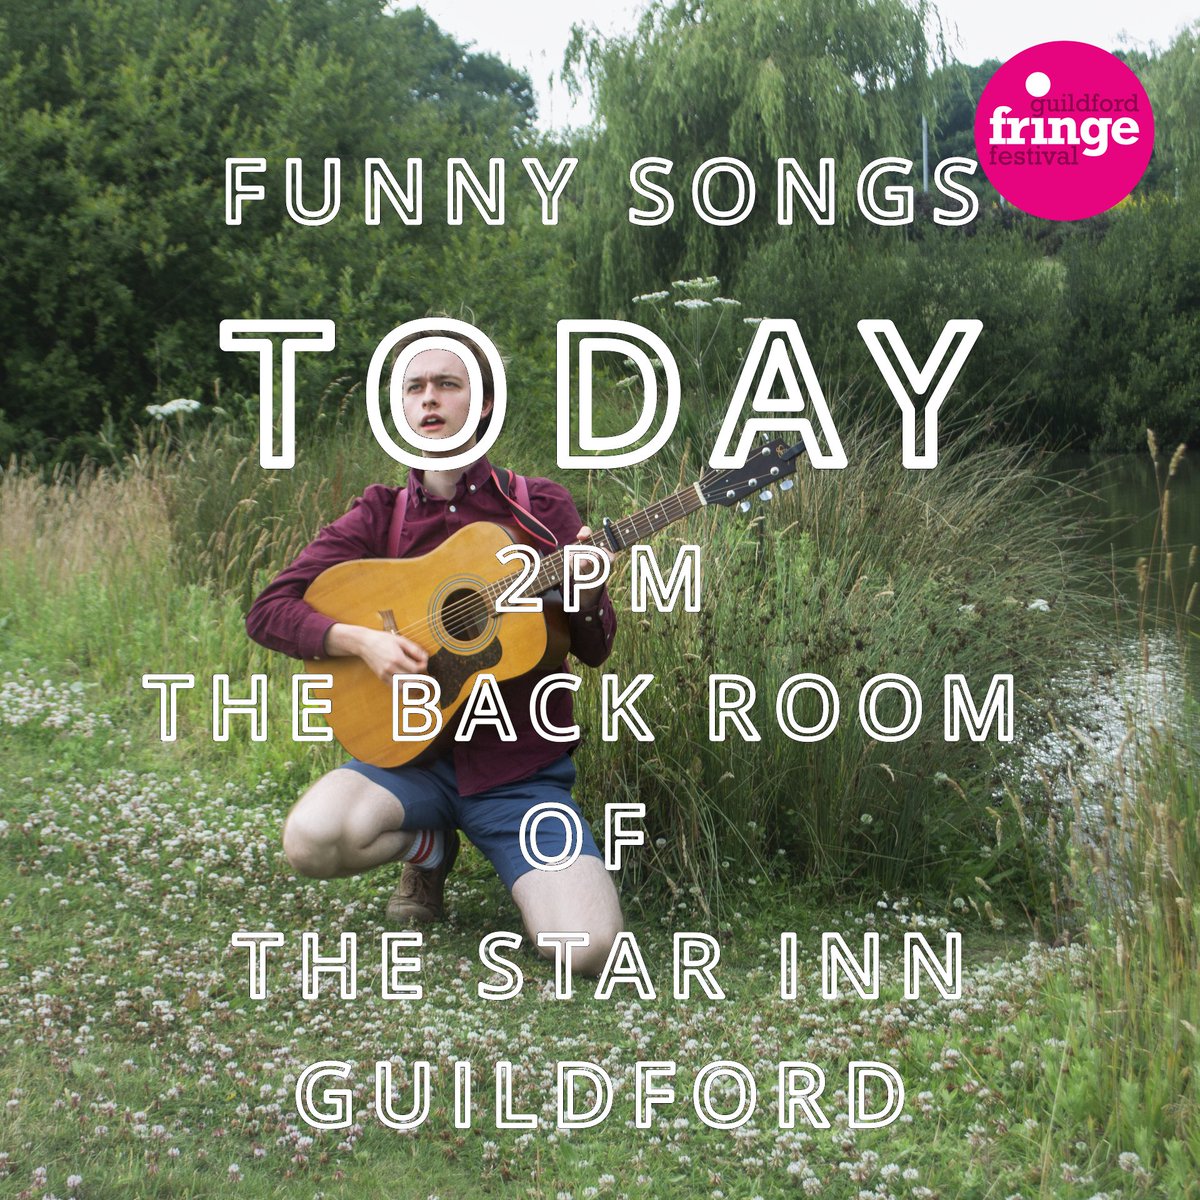 Yo Yo Yo Yo!

Tickets here:
guildfordfringefestival.com/events/funny-s…

@GuildfordFringe
 
@StarGuildford

#comedy #comedysongs #musicalcomedy #funny

Background image graded by 
@lukewarmnuggets